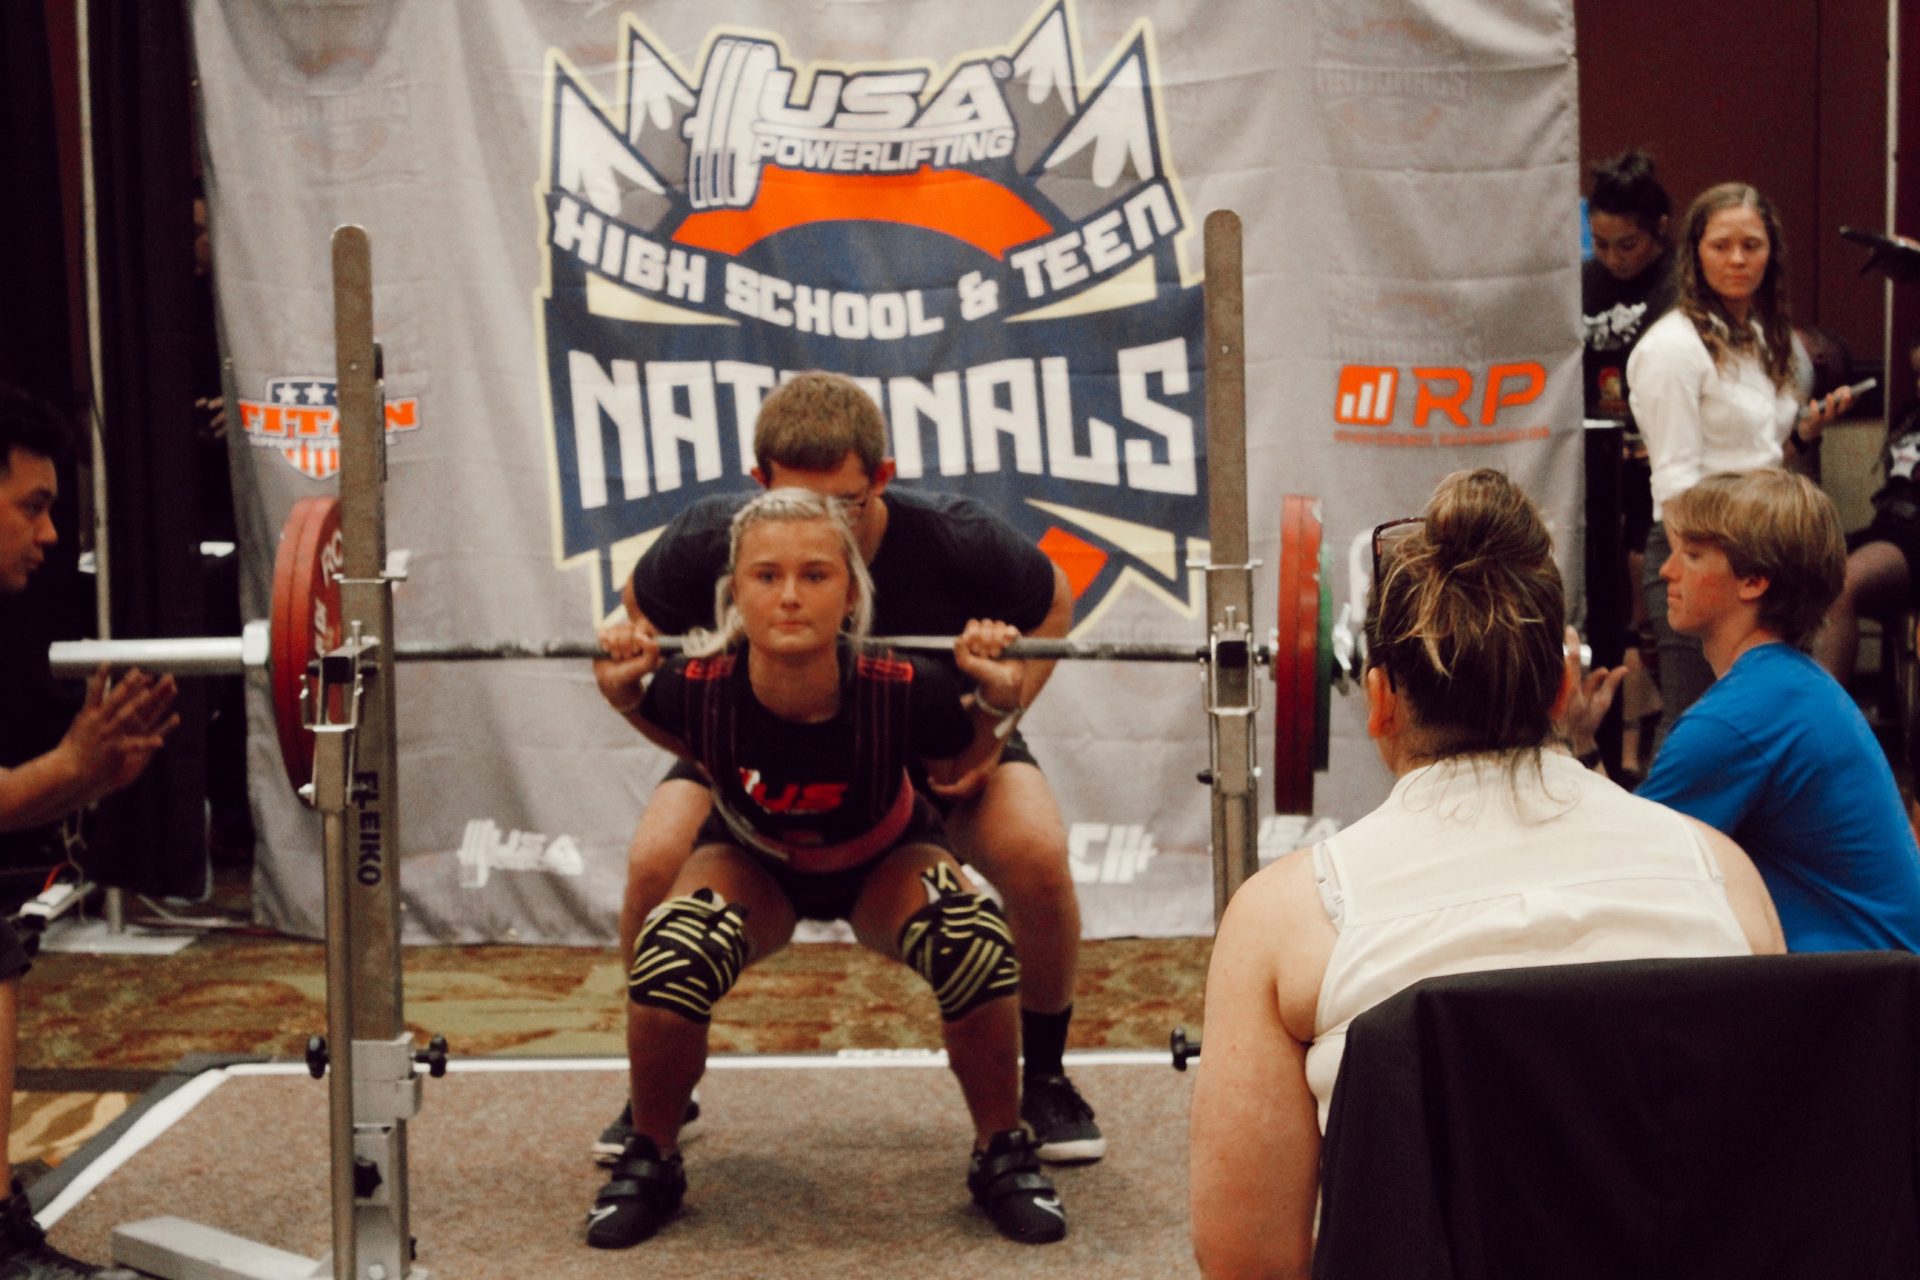 High school girls set records at powerlifting competition